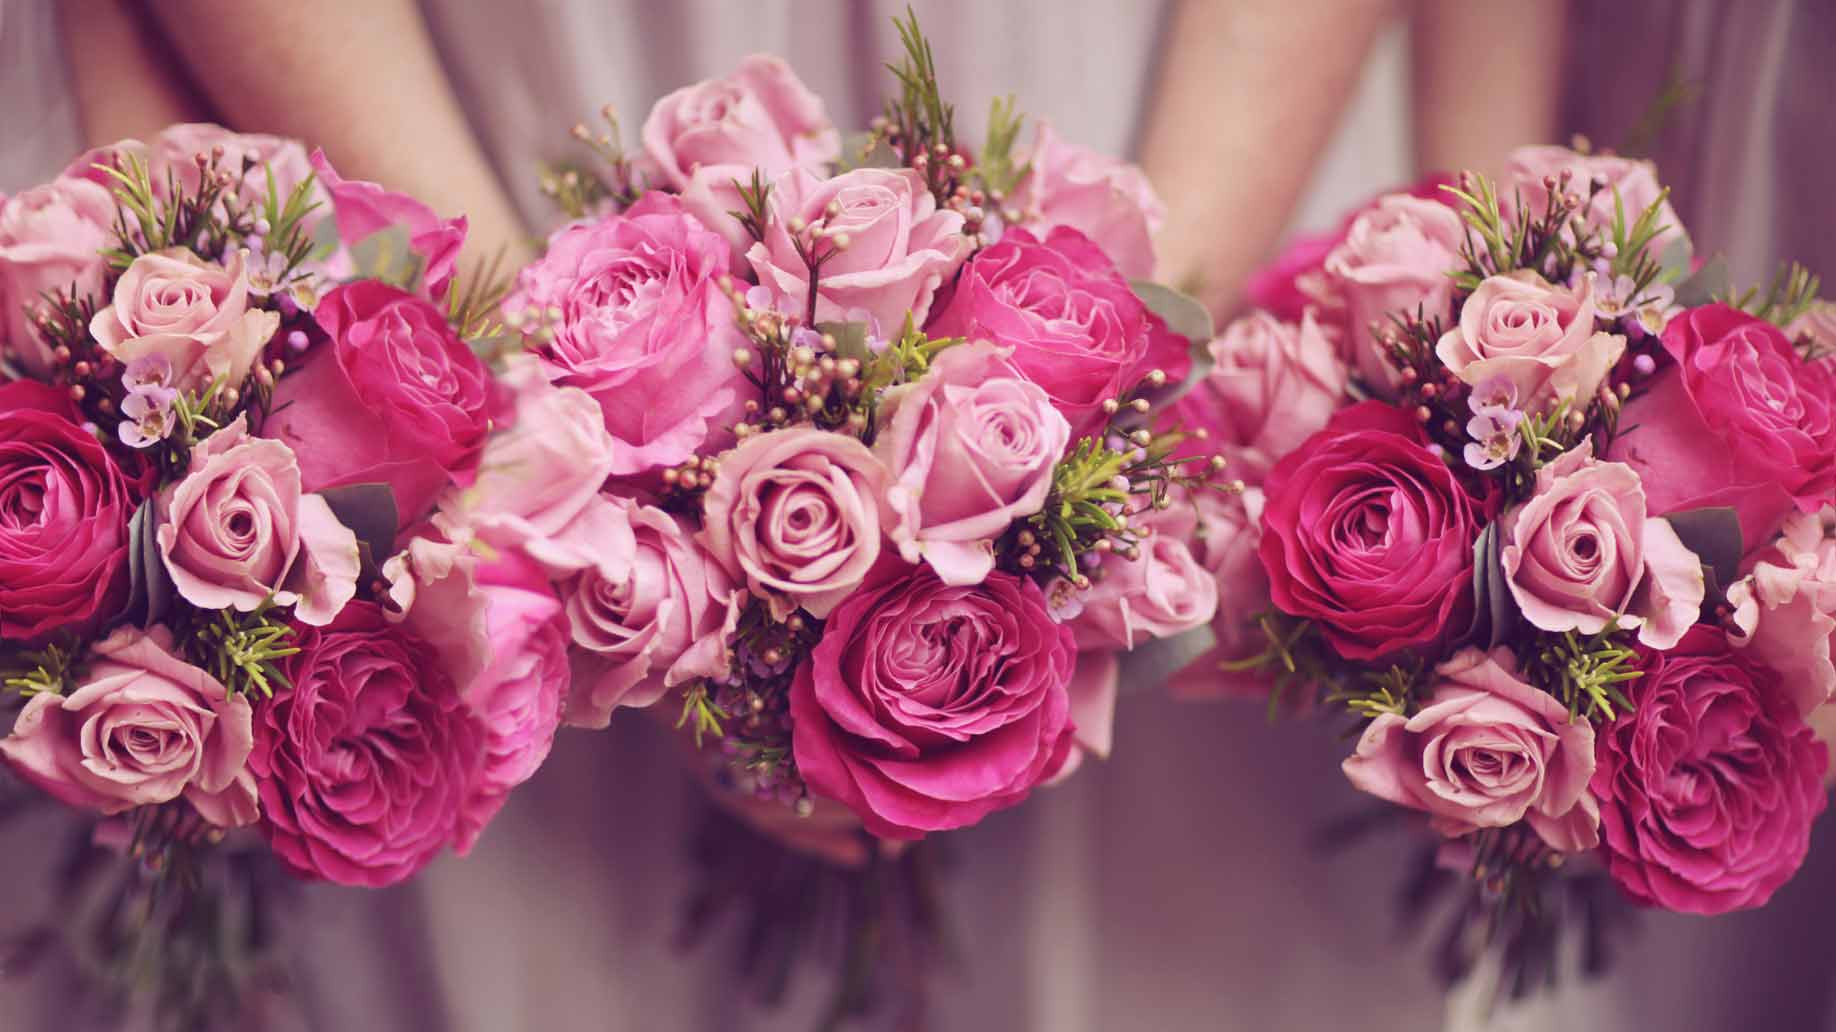 Inexpensive Wedding Flowers
 10 Ways to Get Cheap Wedding Flowers for Any Bud